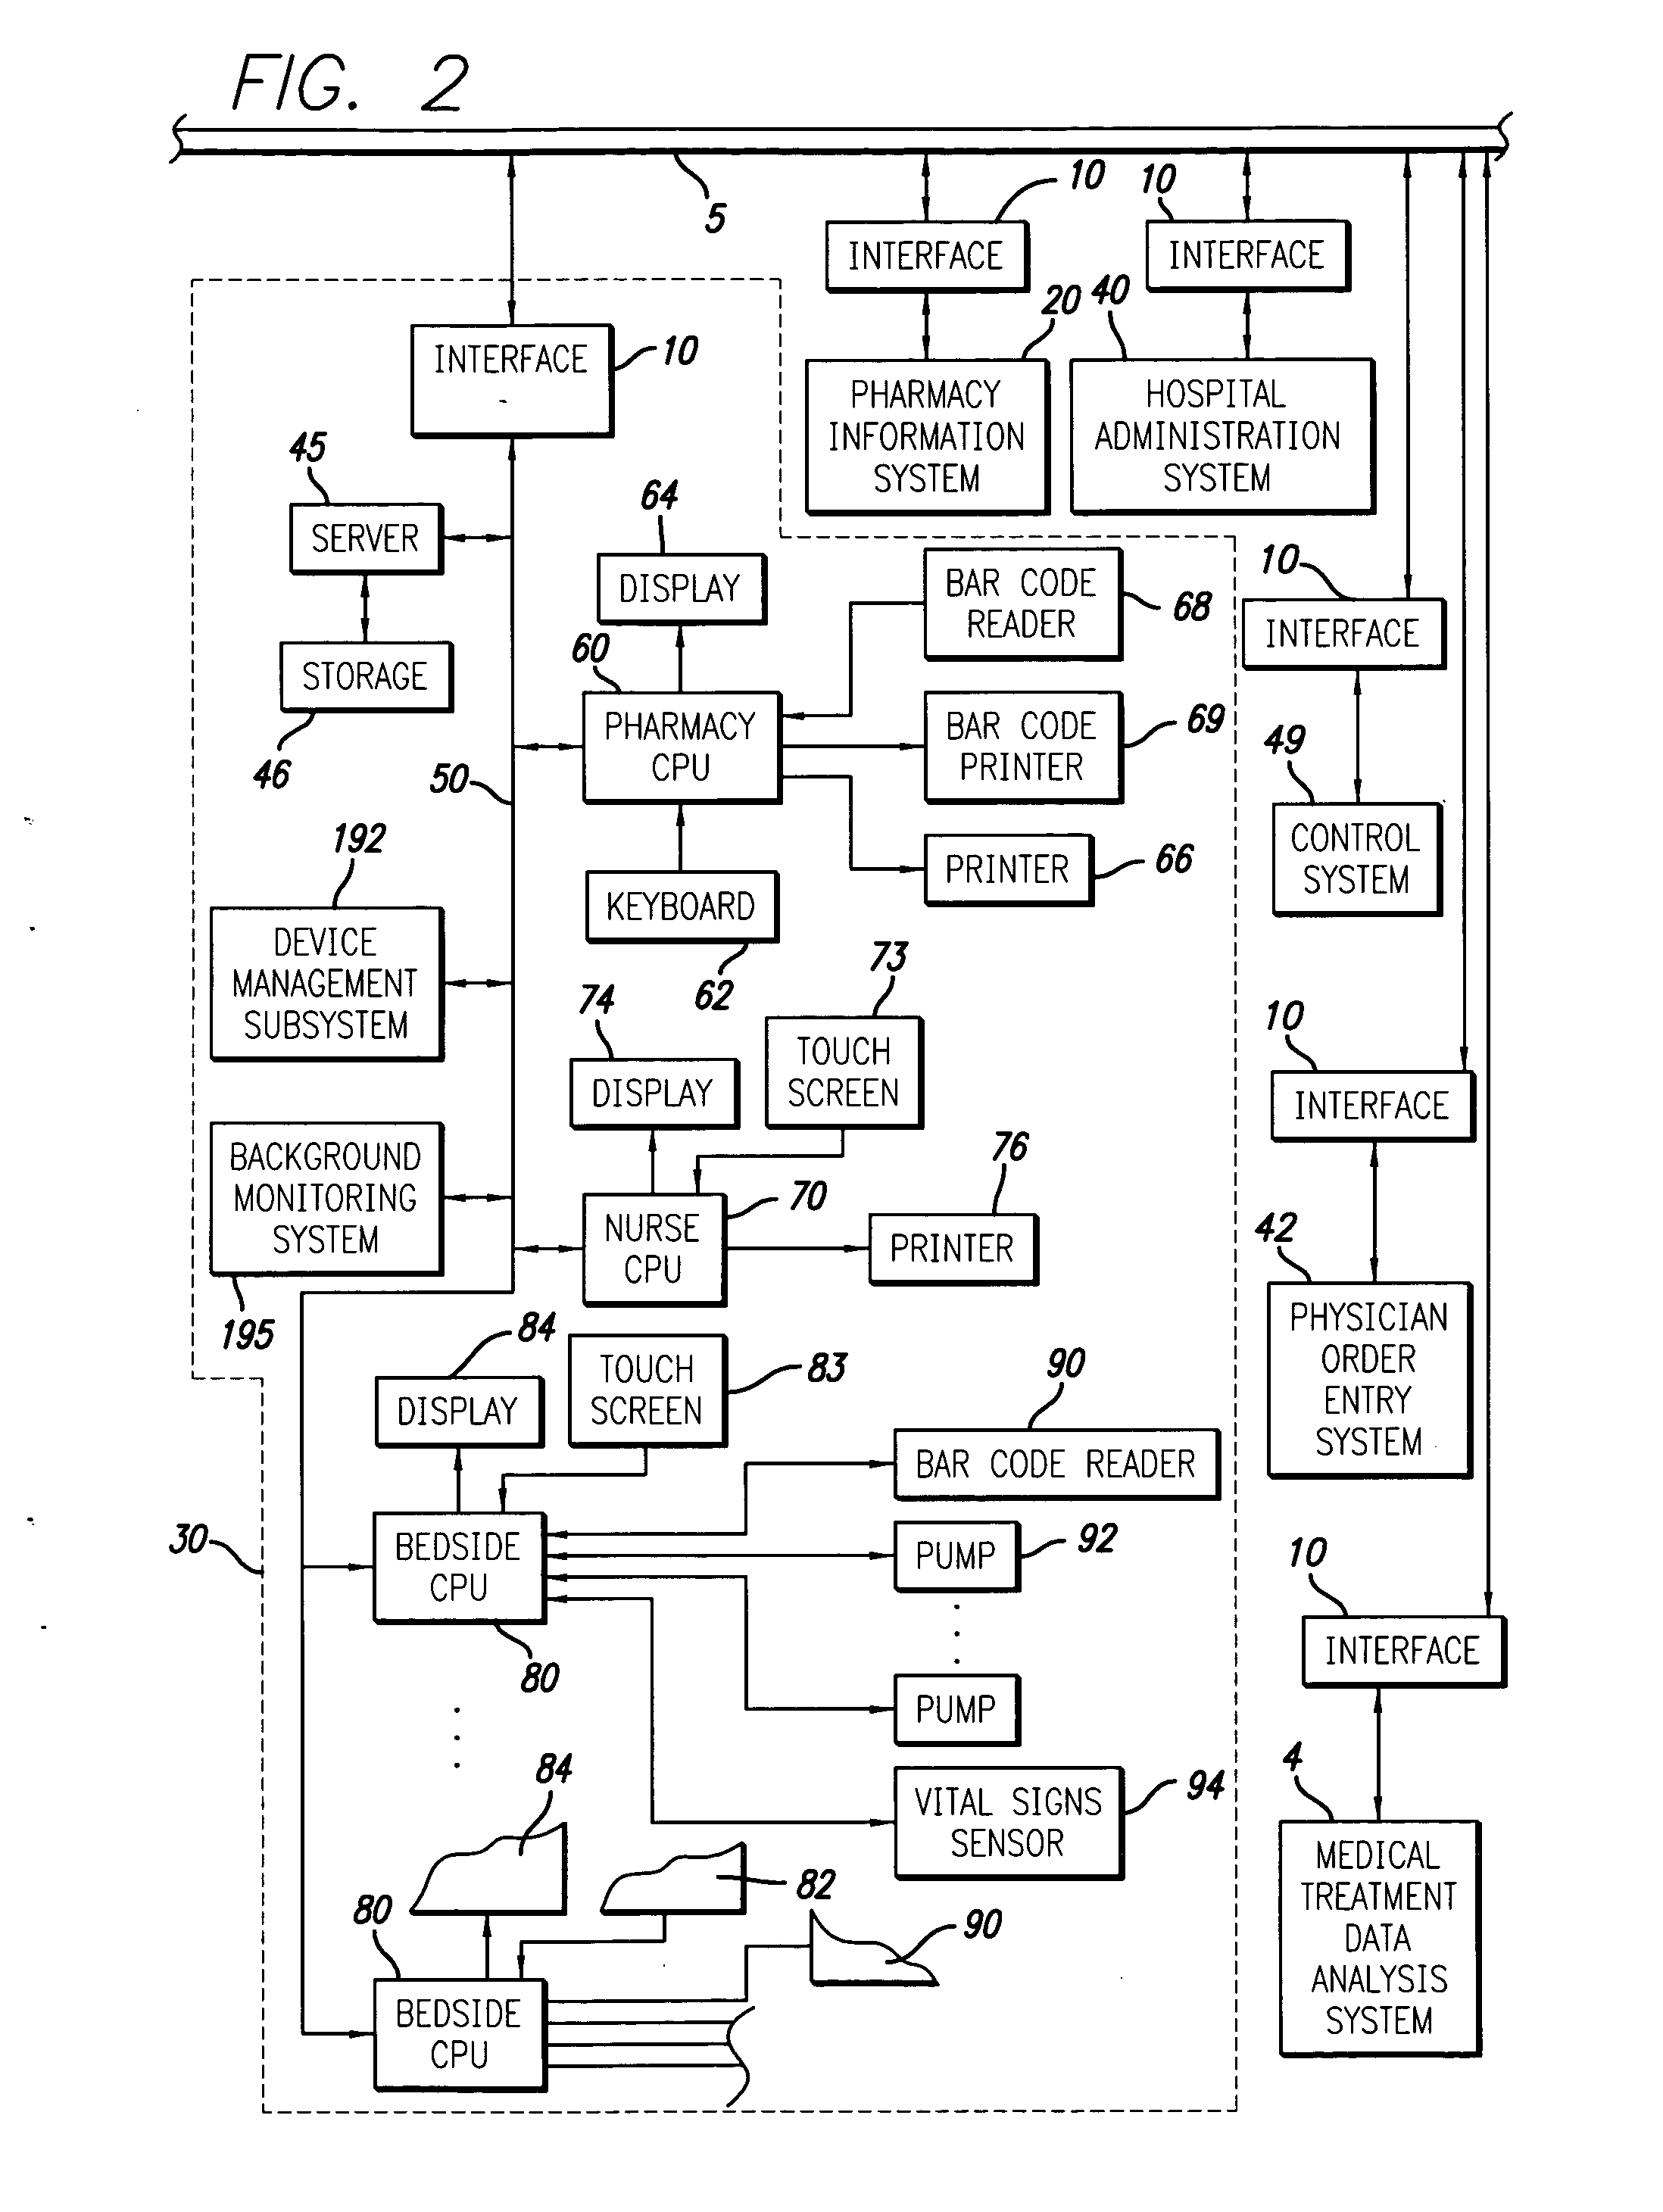 System and method for analyzing medical treatment data